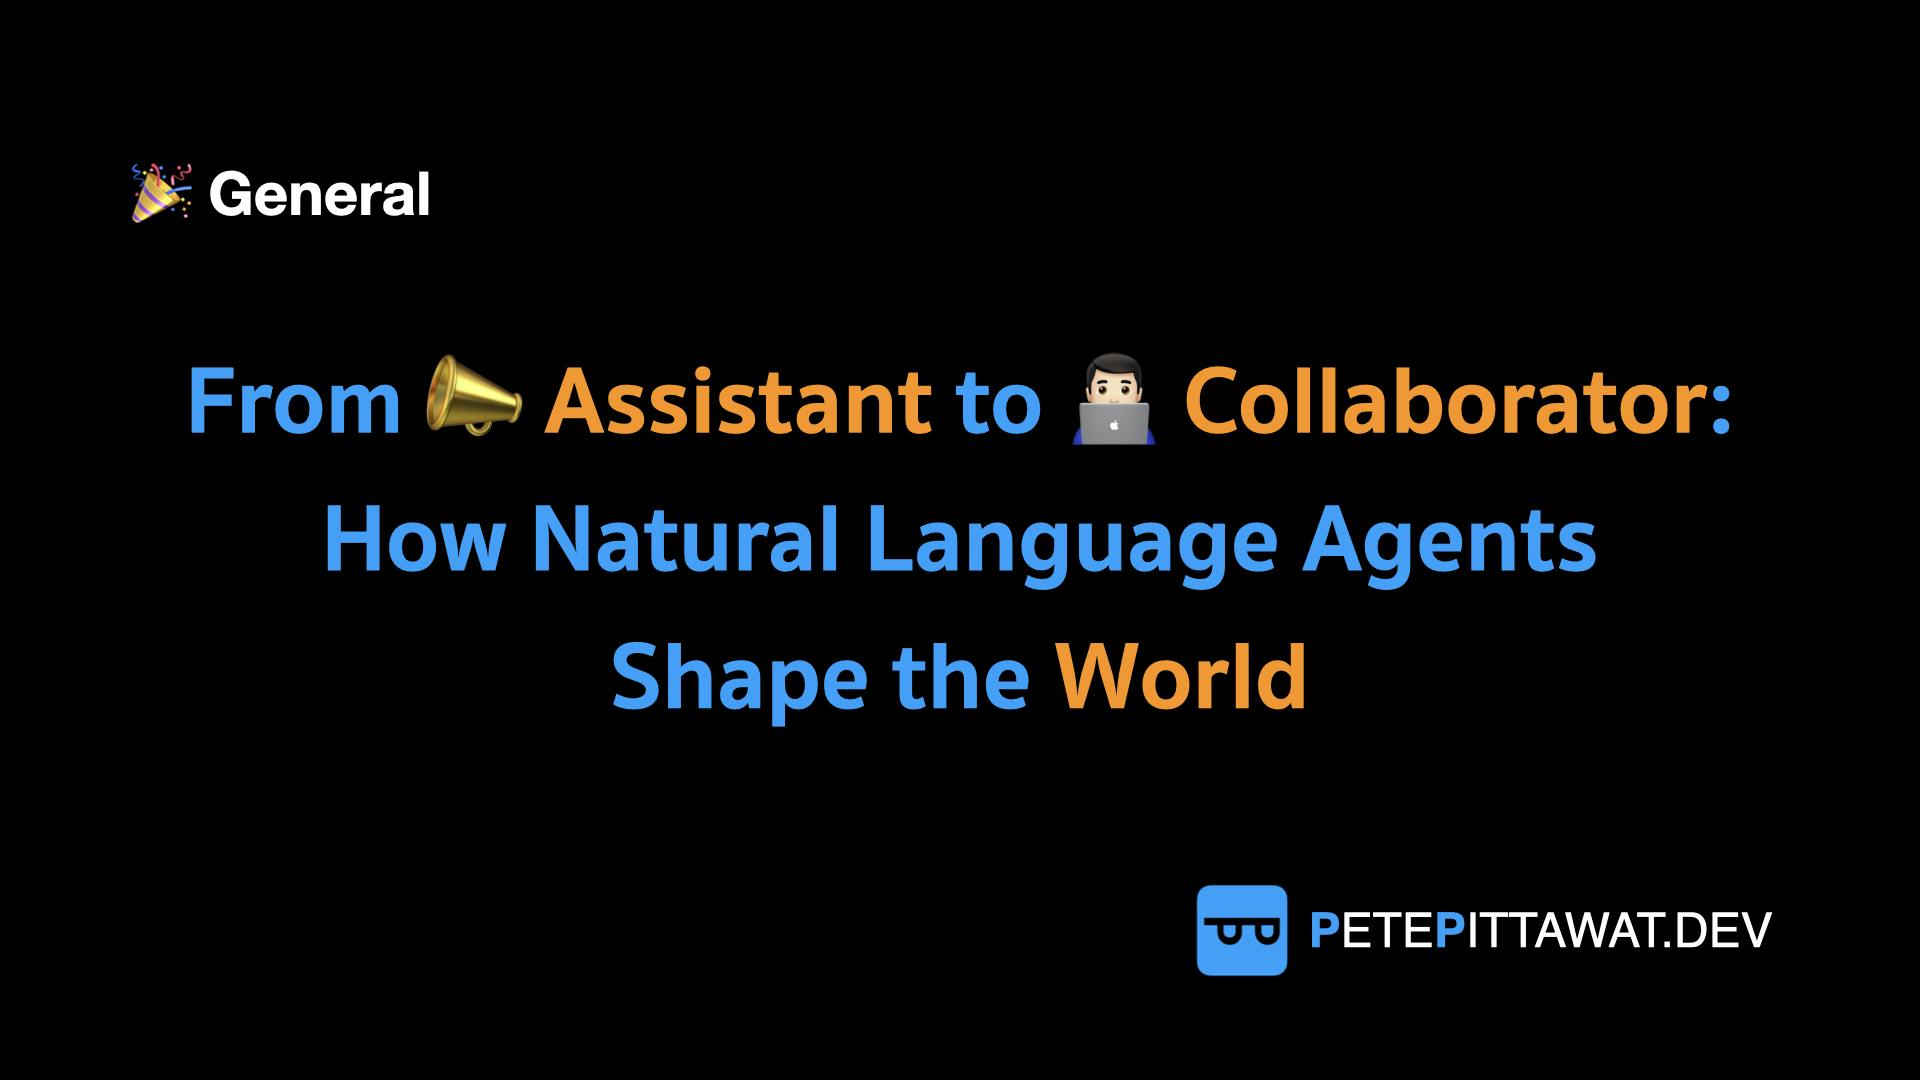 Cover Image for From Assistant to Collaborator: How Natural Language Agents Shape the World